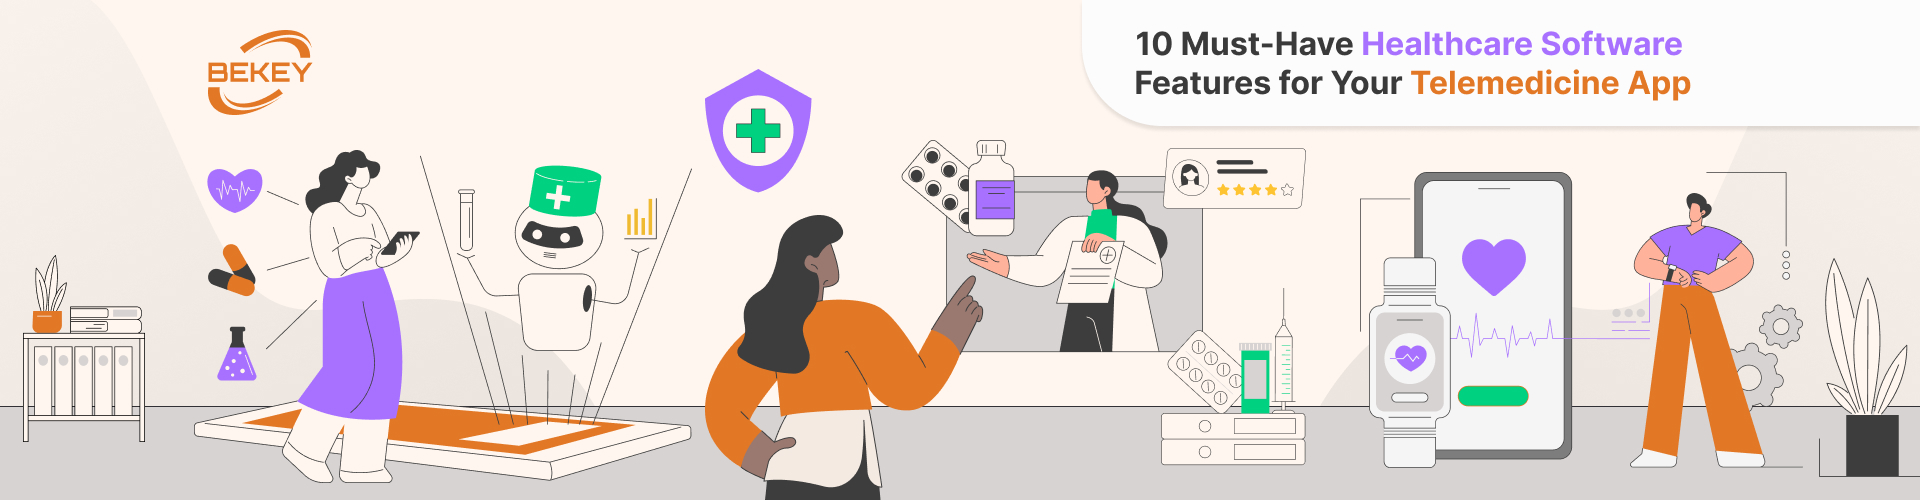 10 Must-Have Healthcare Software Features for Your Telemedicine App - image